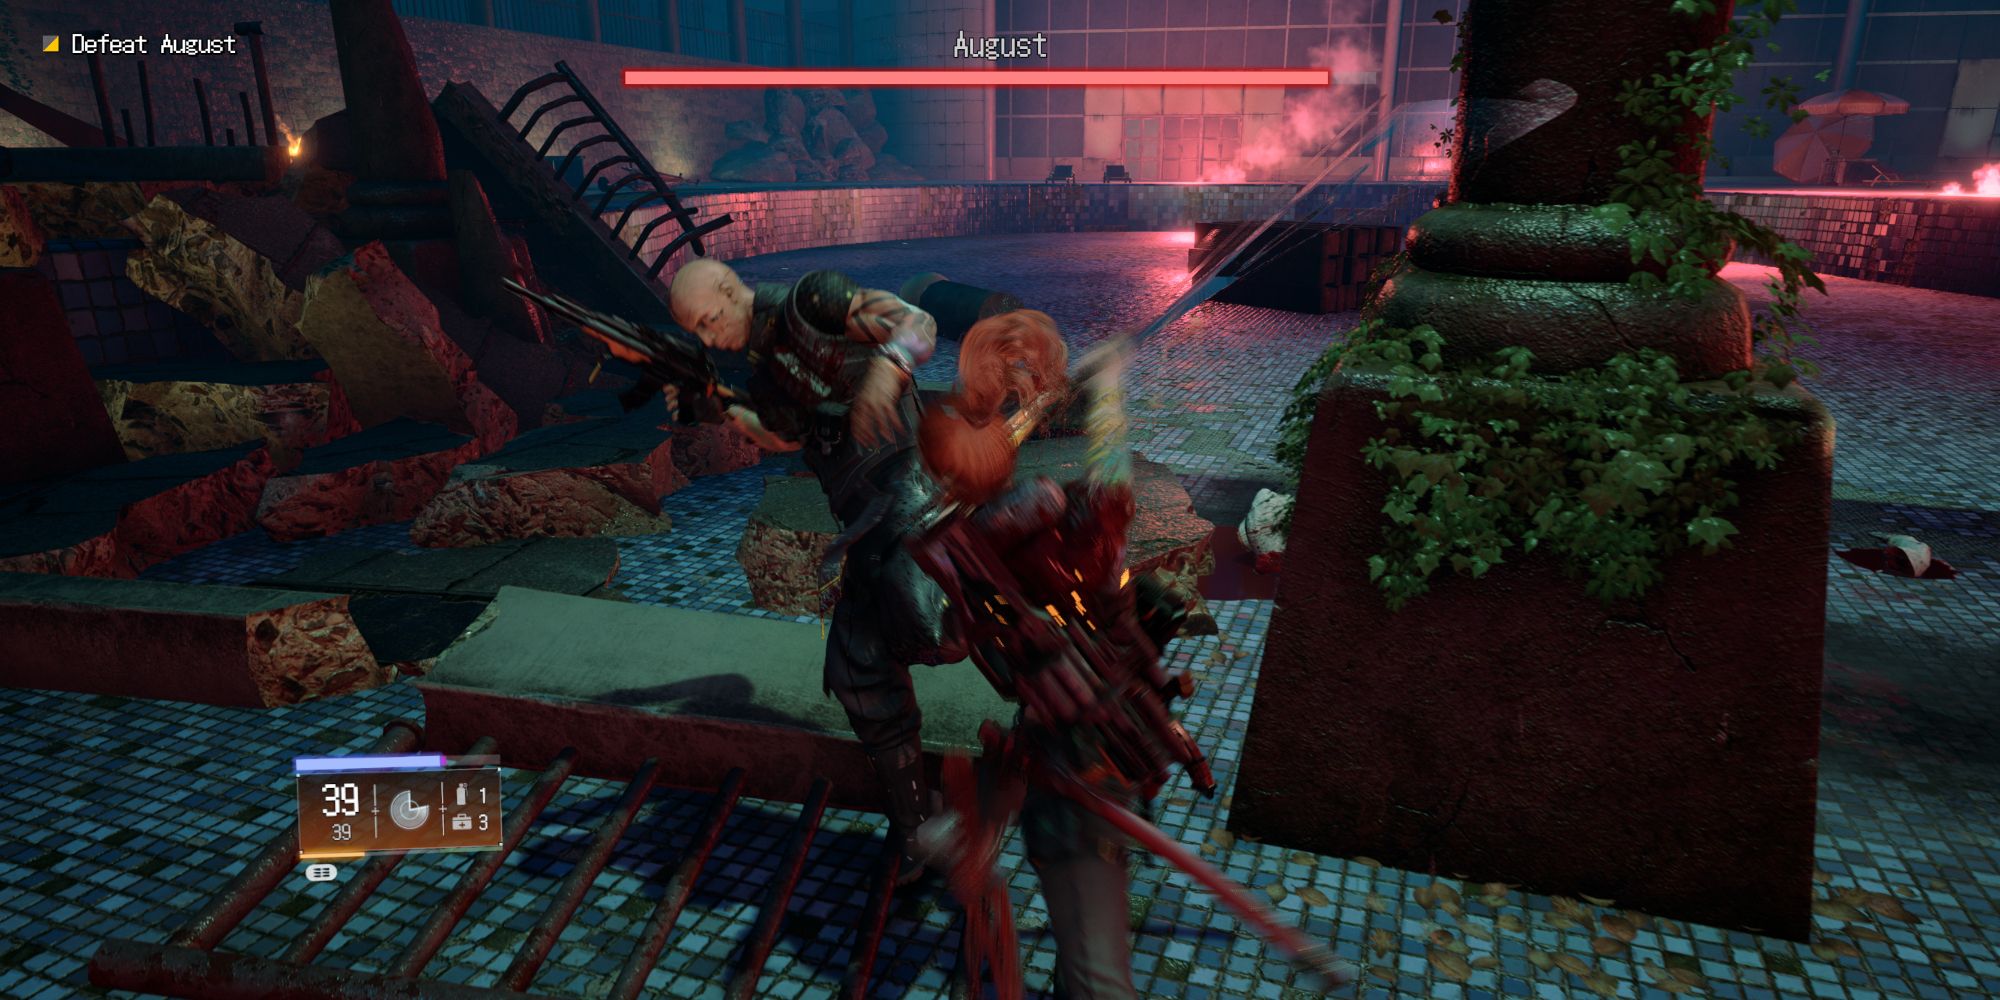 Stone attacking August with her Katana during the first phase of the boss encounter in Wanted: Dead